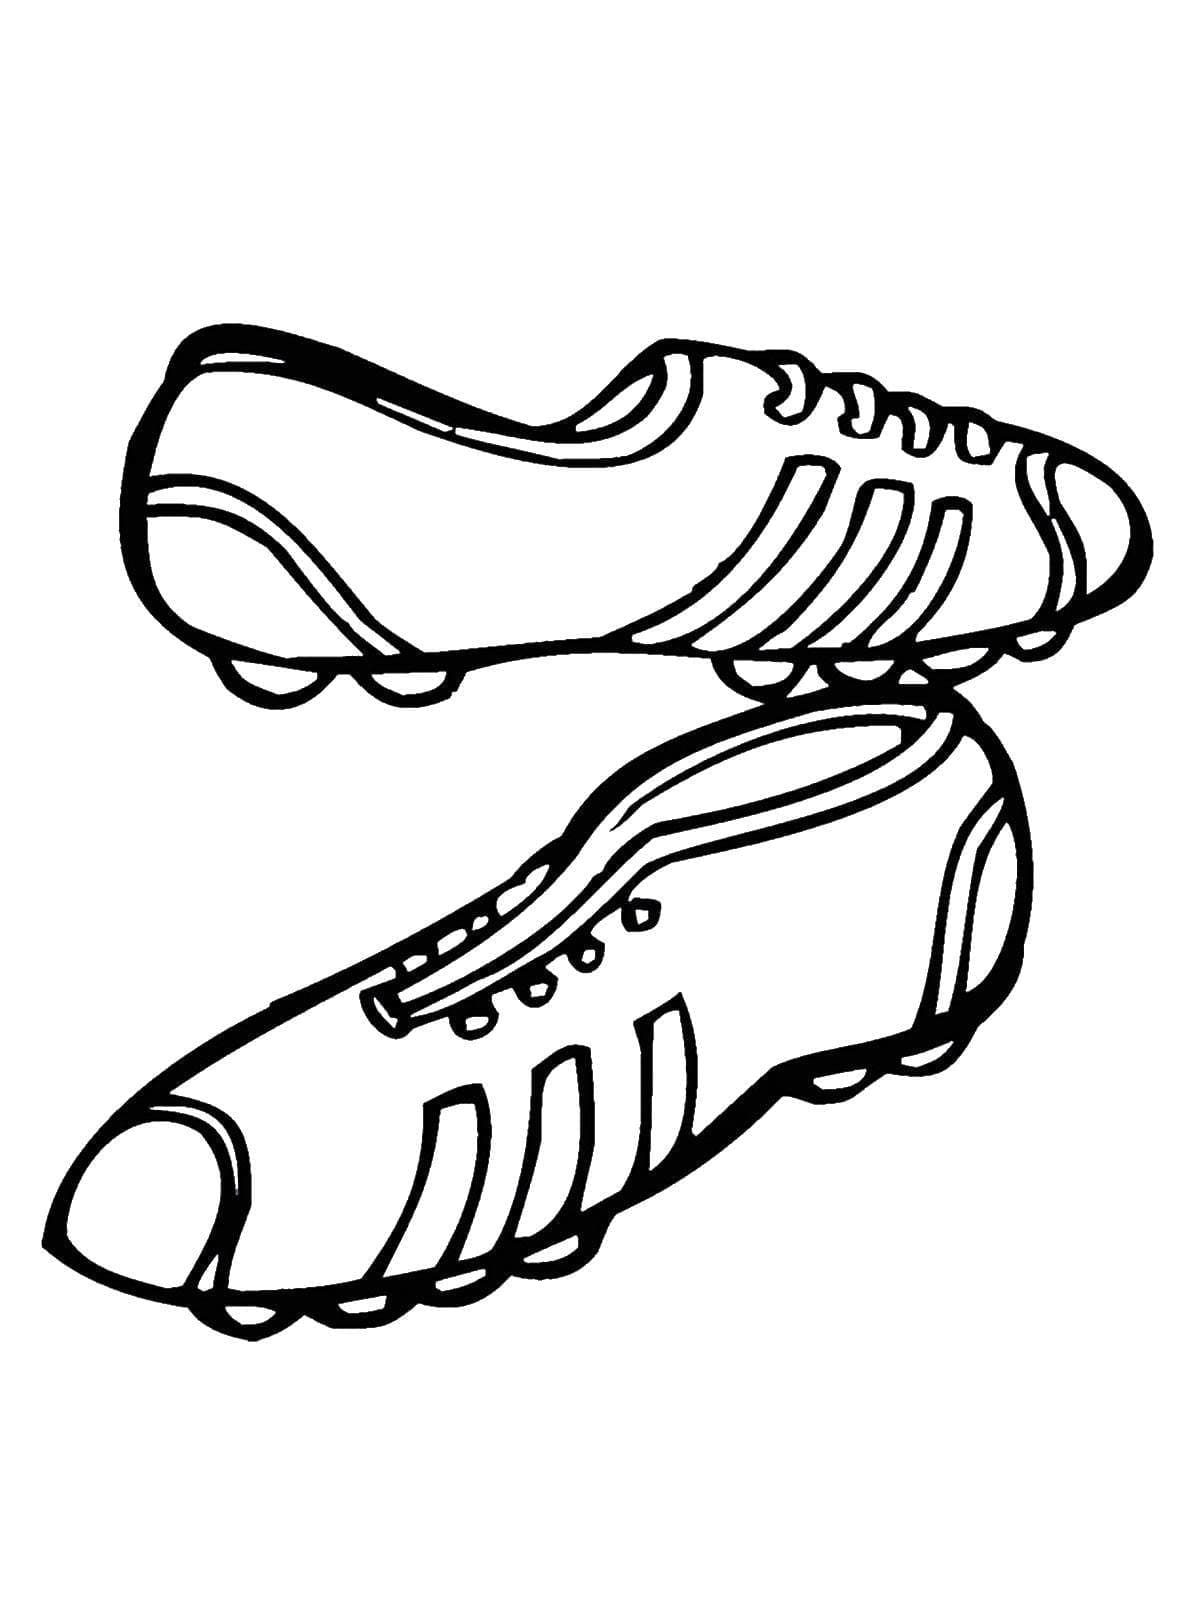 Chaussures de Foot coloring page